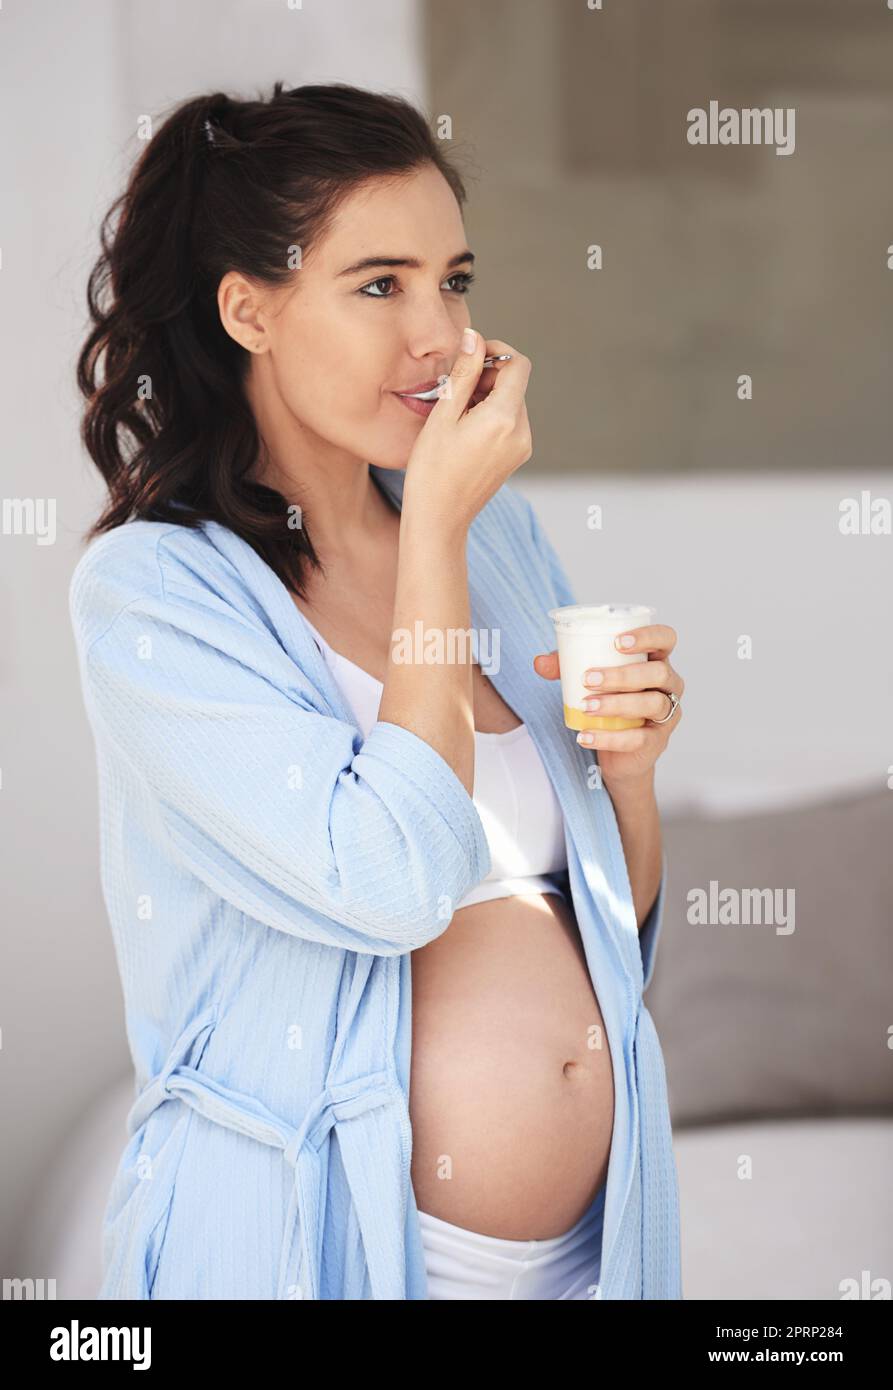 Snacking for two. a pregnant woman enjoying a snack at home. Stock Photo